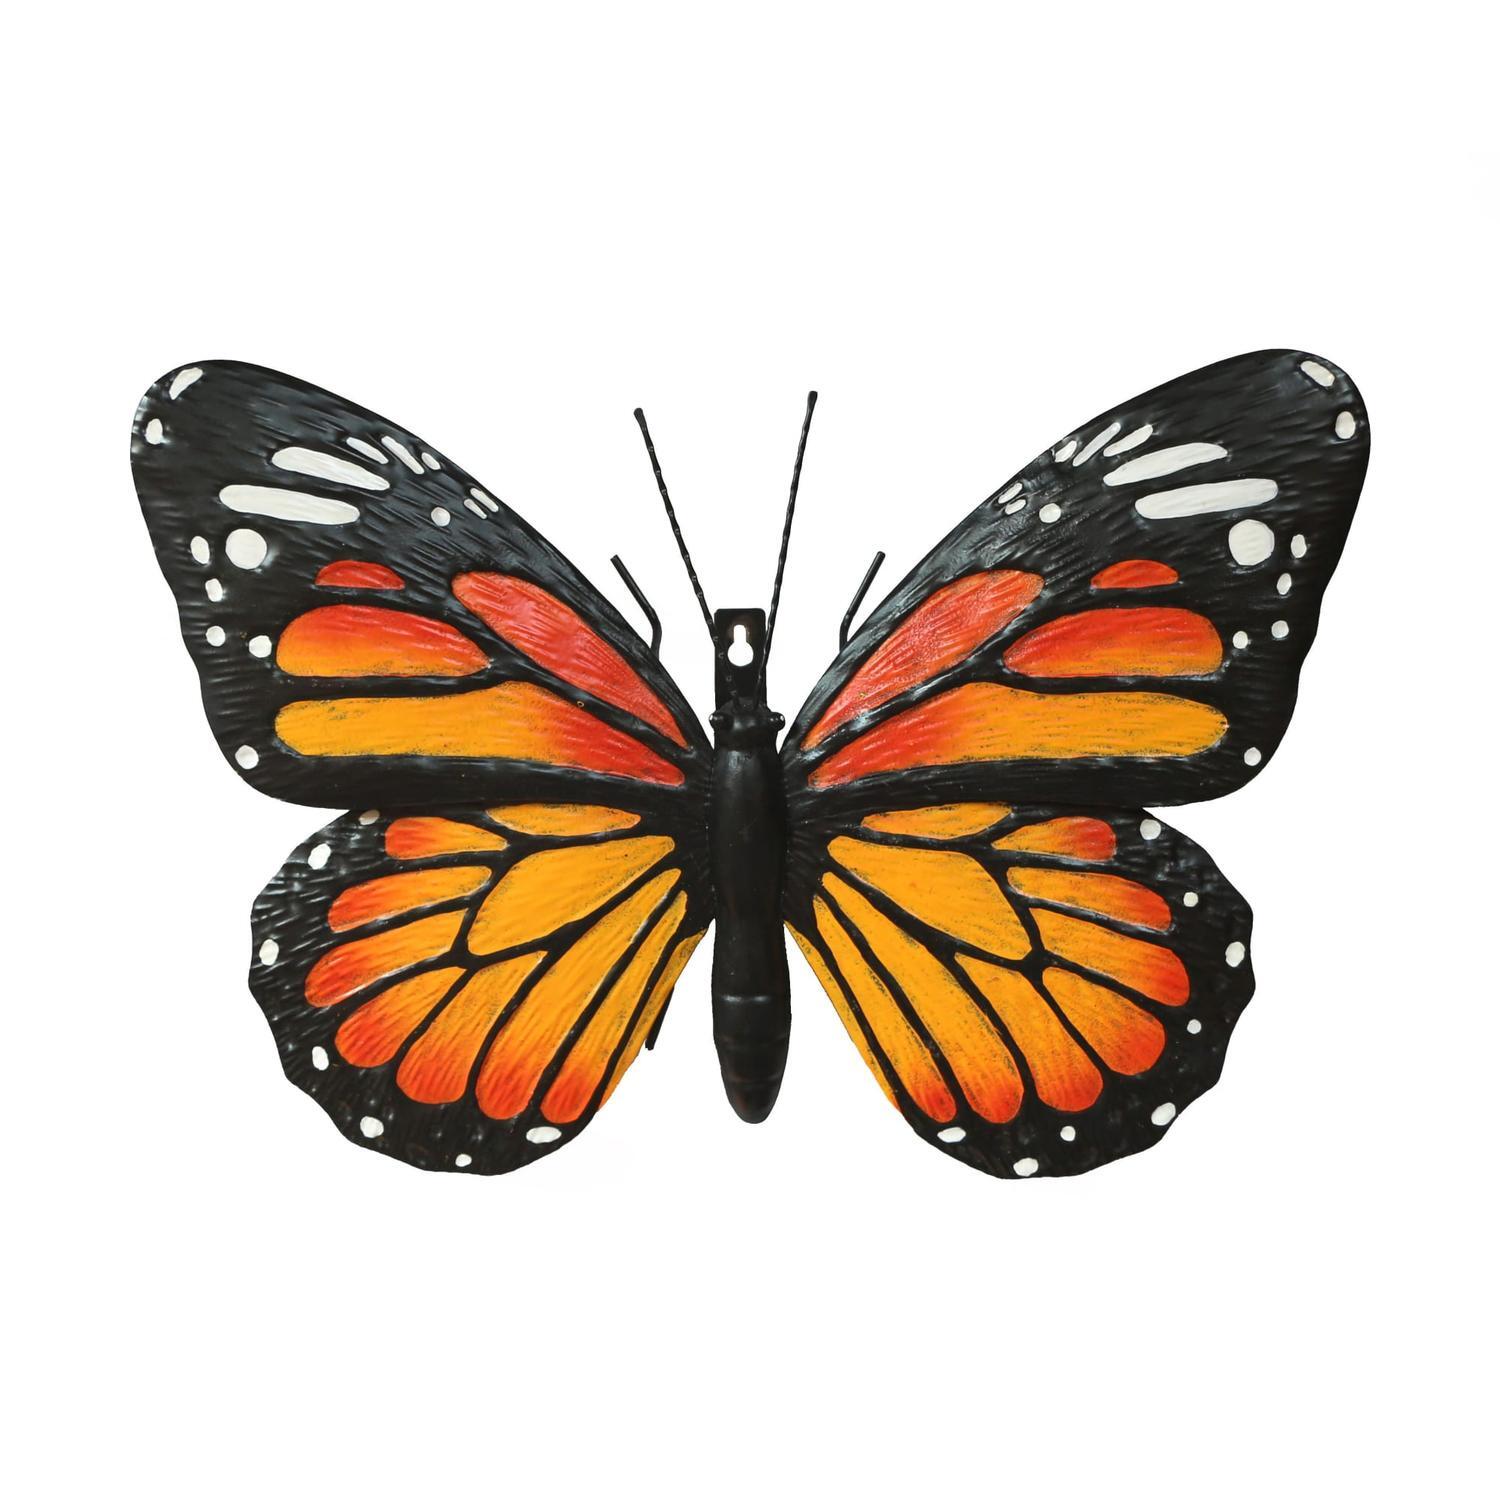 MIXT NZ art + design - These cute Monarch butterfly decorations